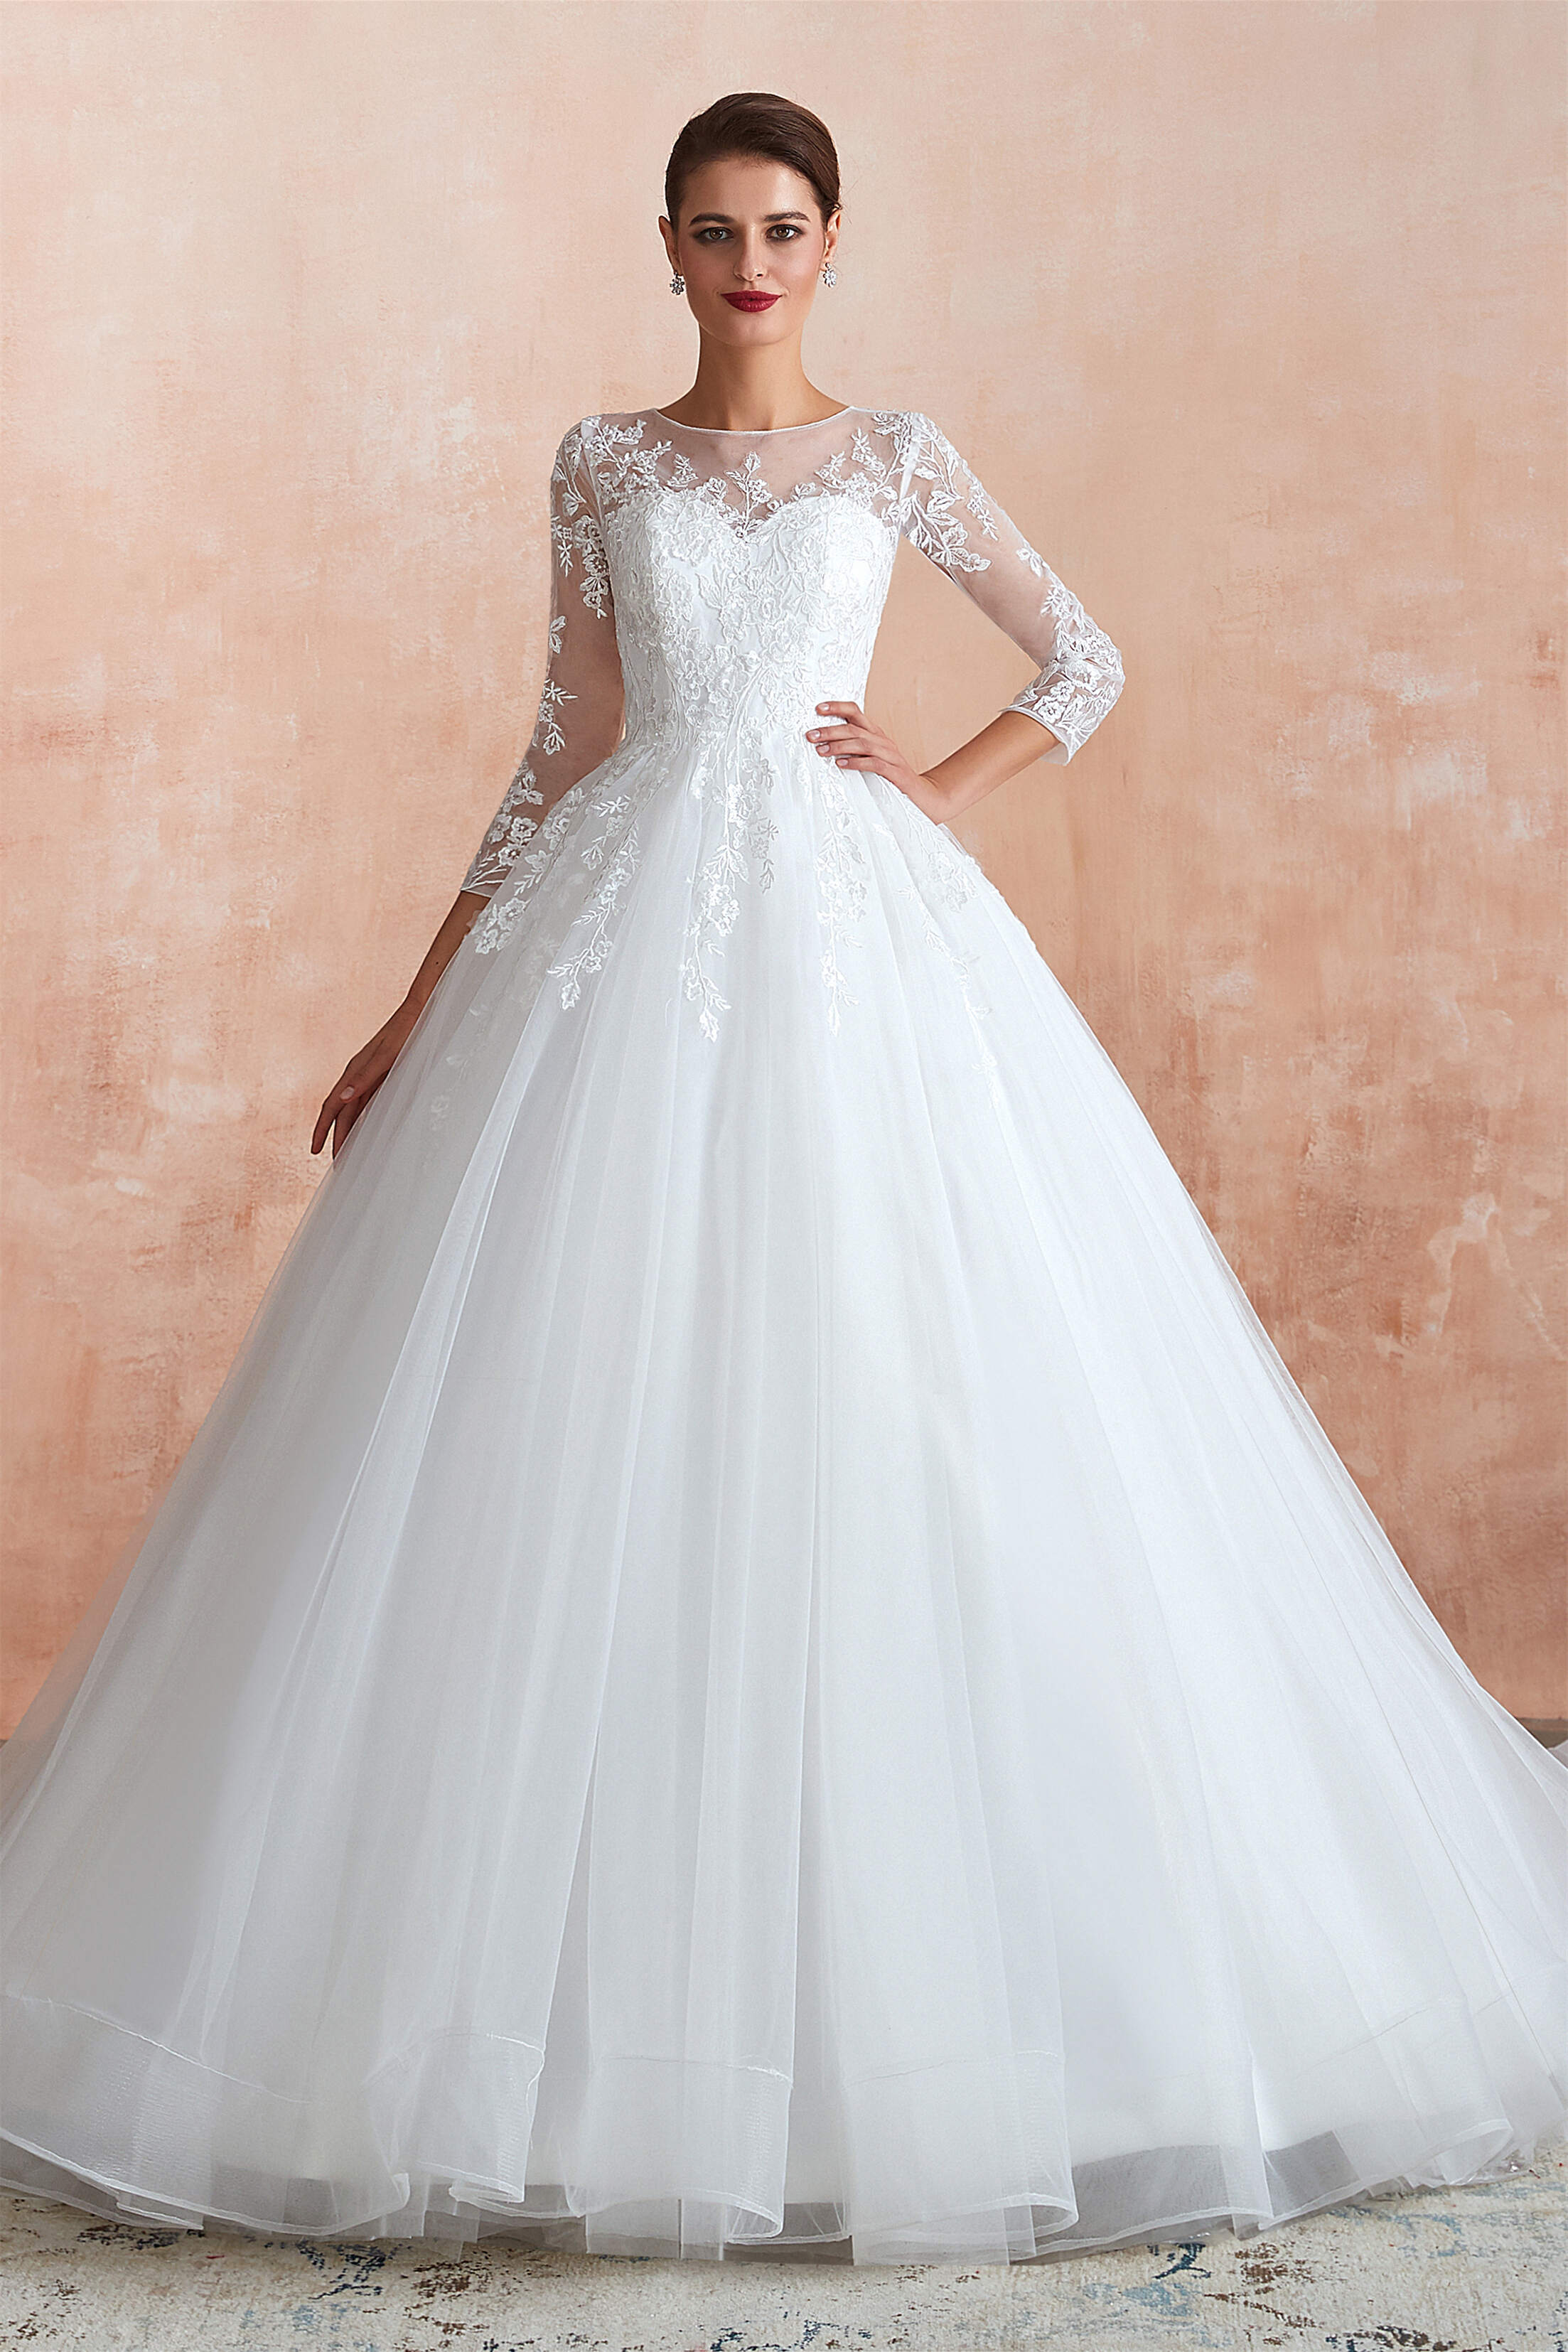 Lace Jewel White Tulle Corset Wedding Dresses with 3/4 Sleeves Gowns, Wedding Dress Long Sleeve